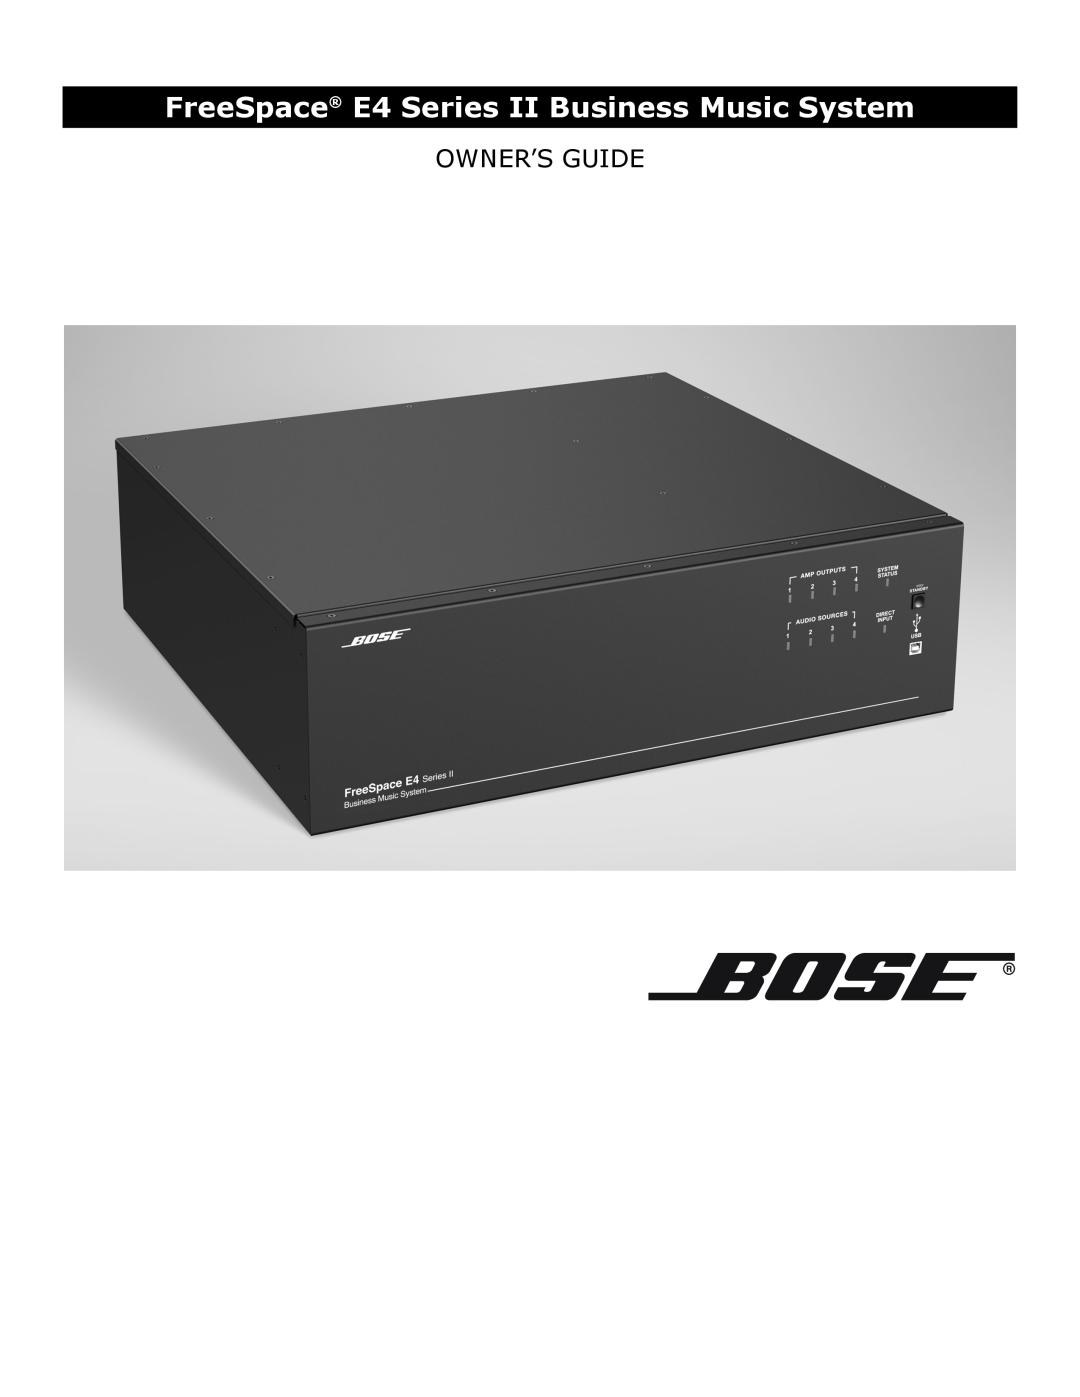 Bose manual FreeSpace E4 Series II Business Music System, Owner’S Guide 